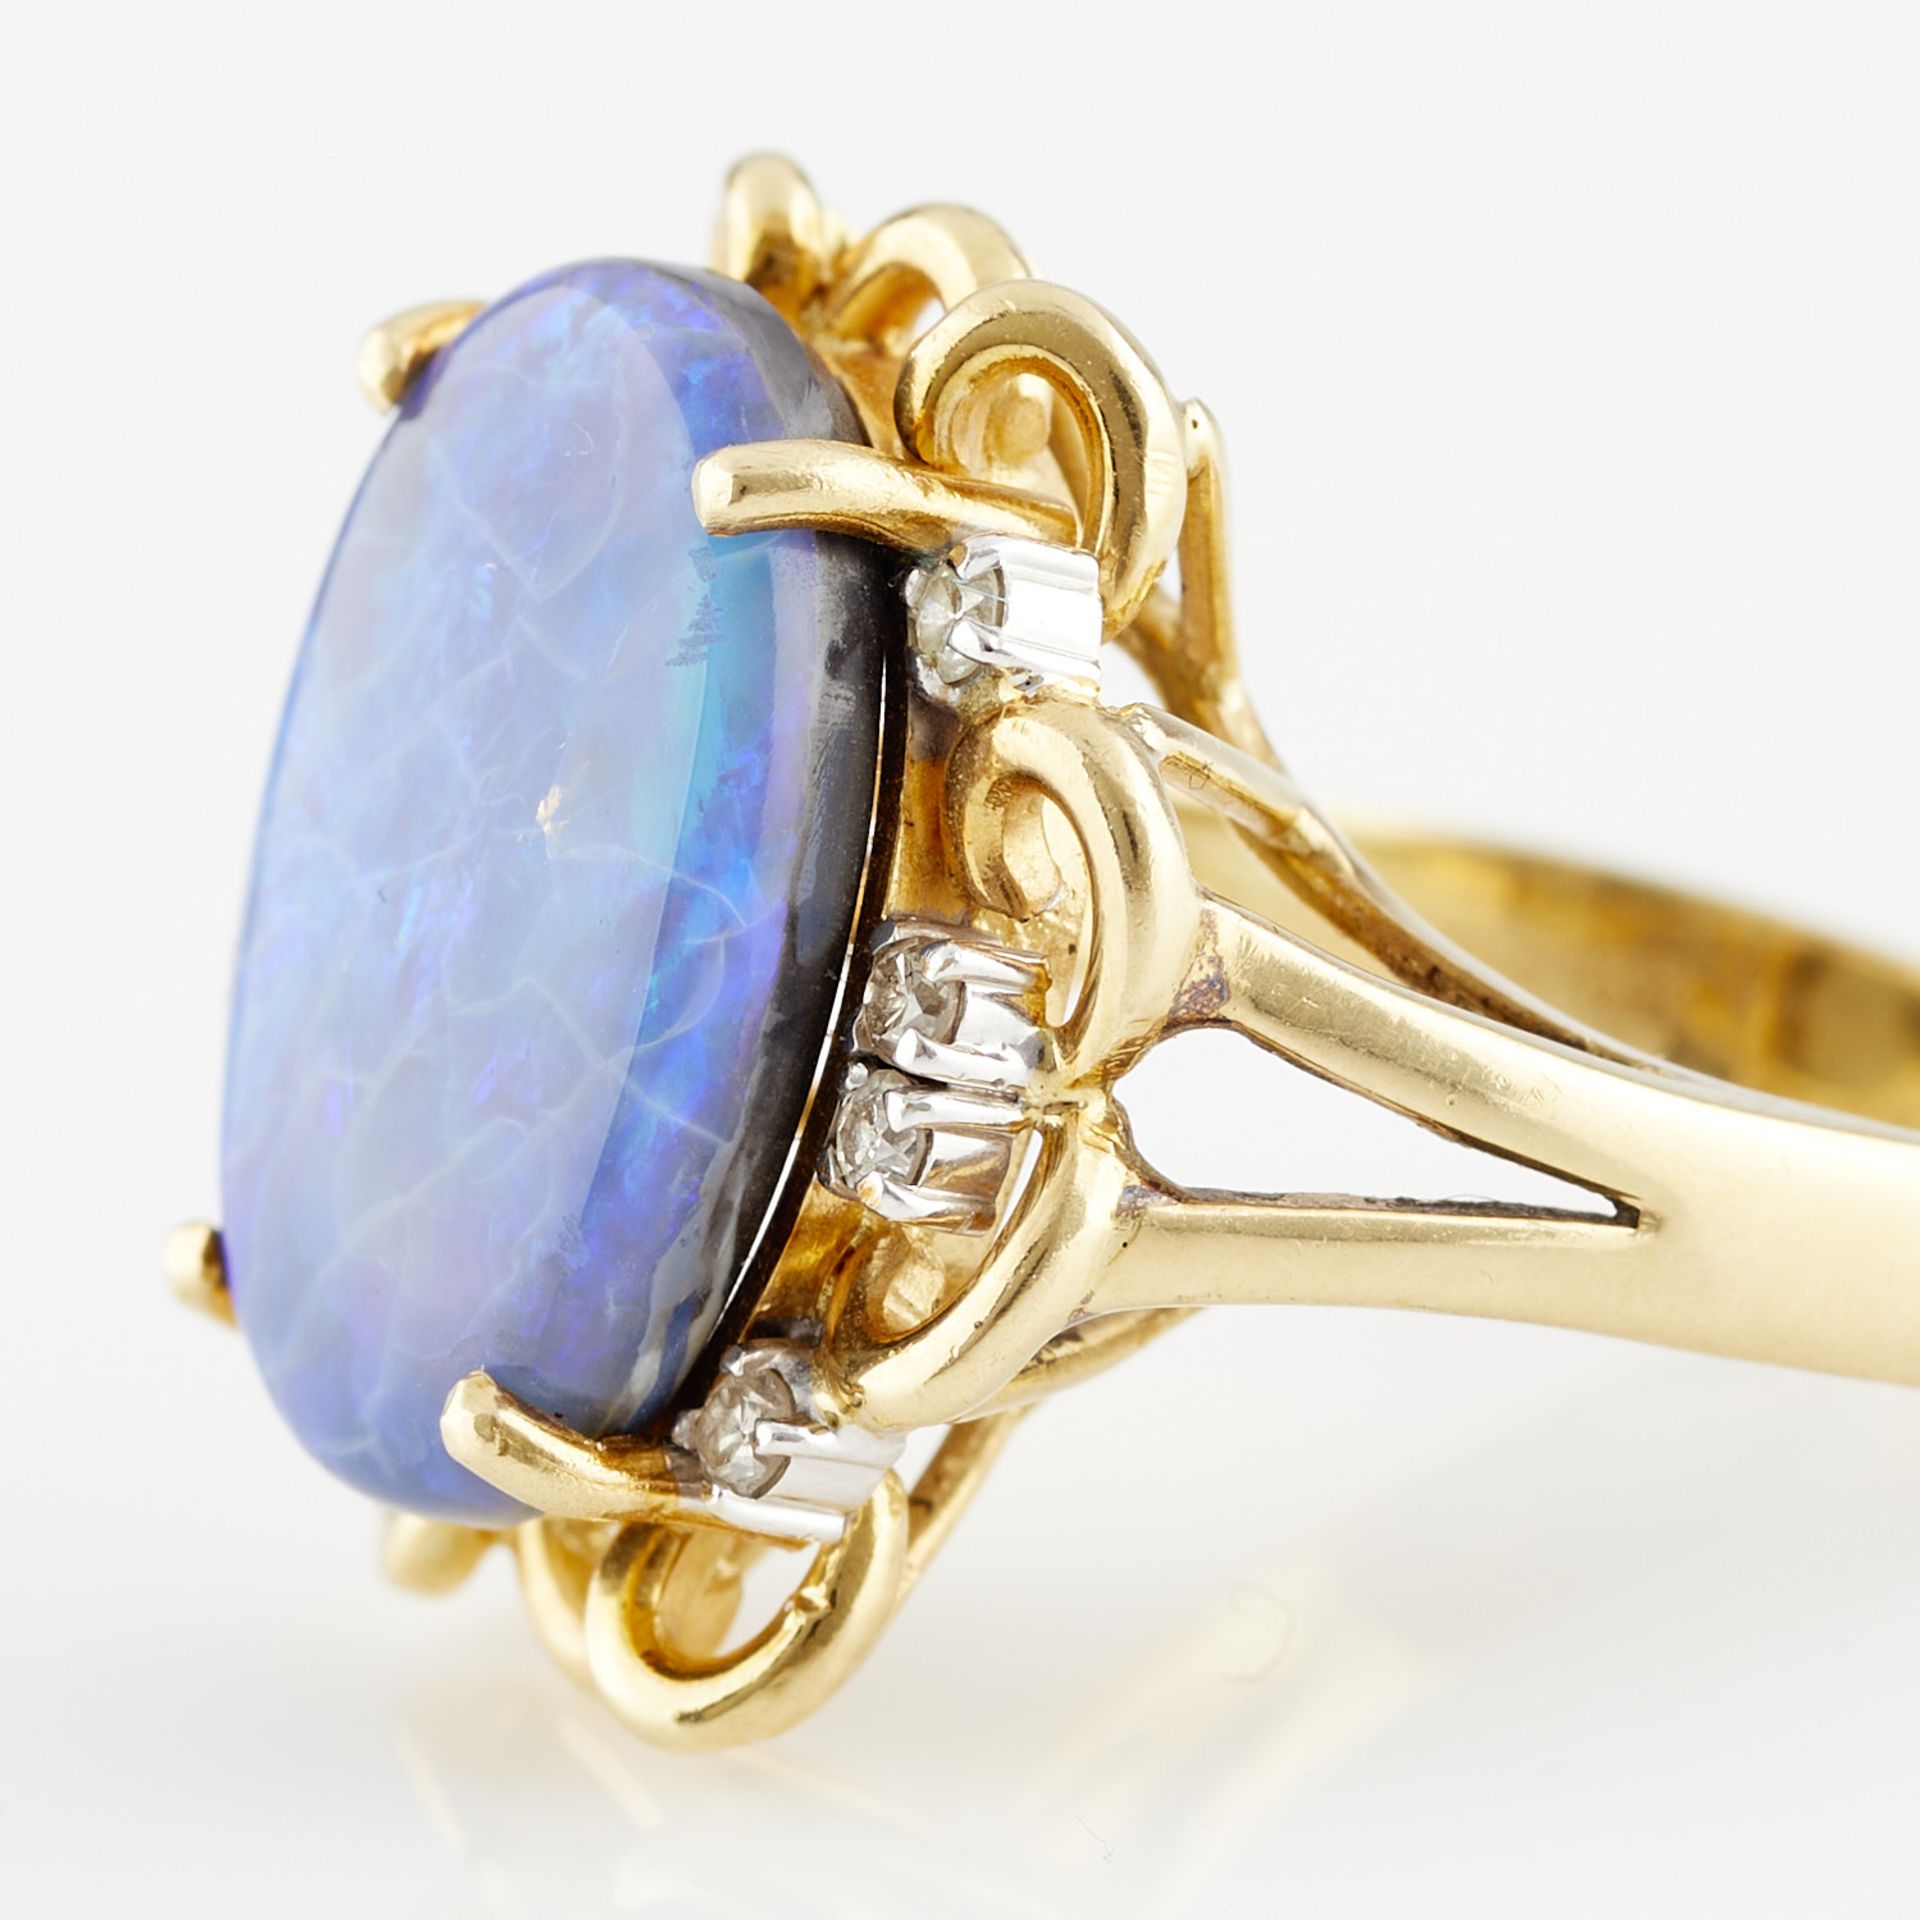 18k Yellow Gold Opal and Diamond Ring - Image 3 of 10